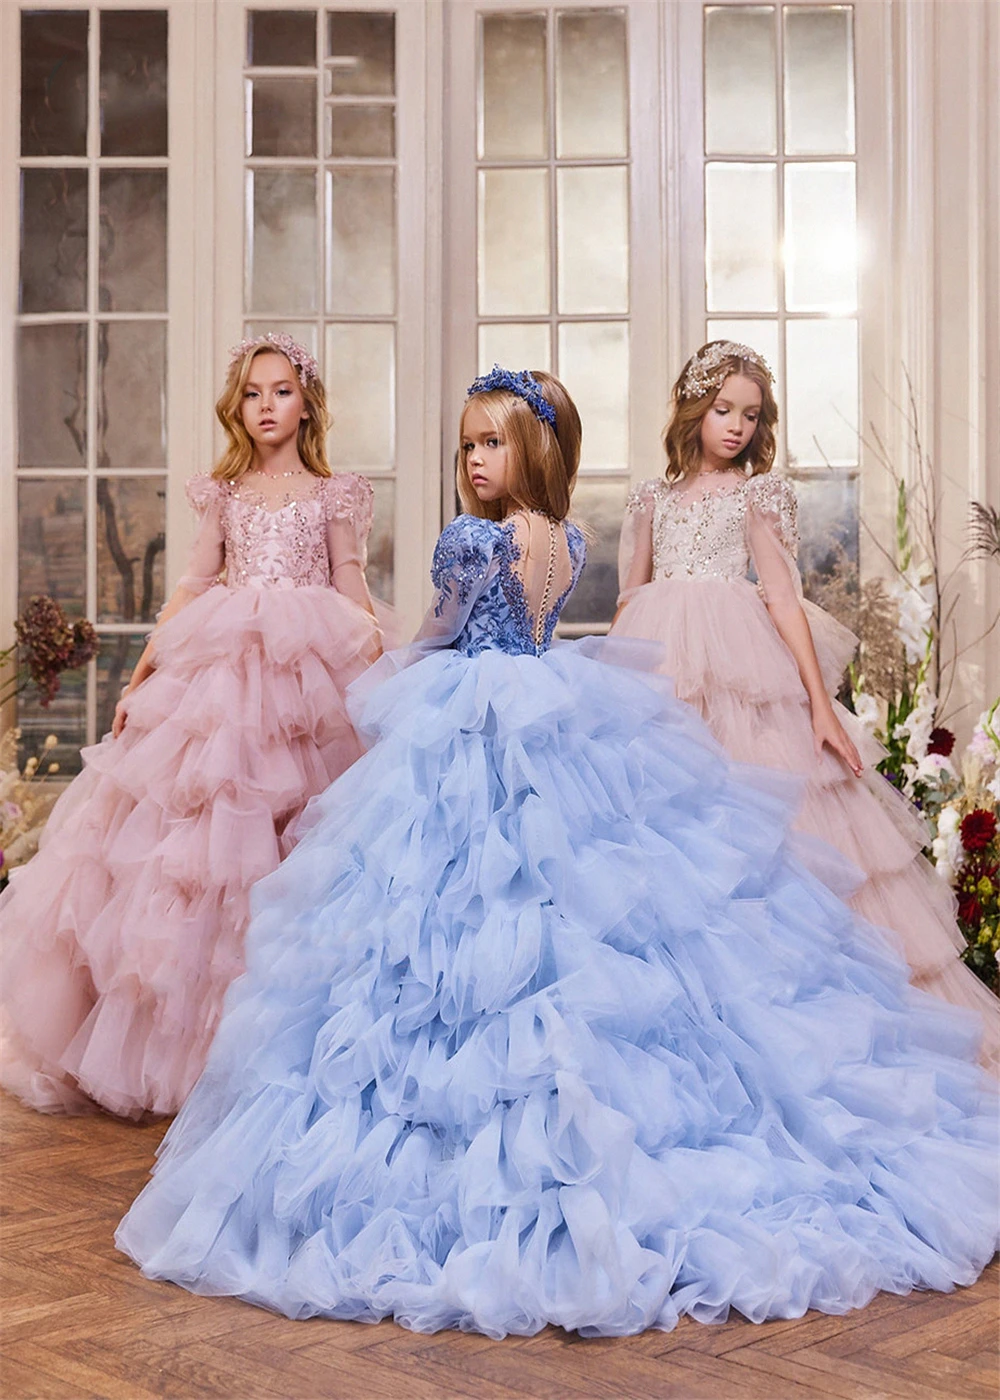 

Elegant Layered Flower Girl Dresses For Wedding Sequin Lace Tulle Puffy Kids Birthday Evening Party Dress Ball First Communion